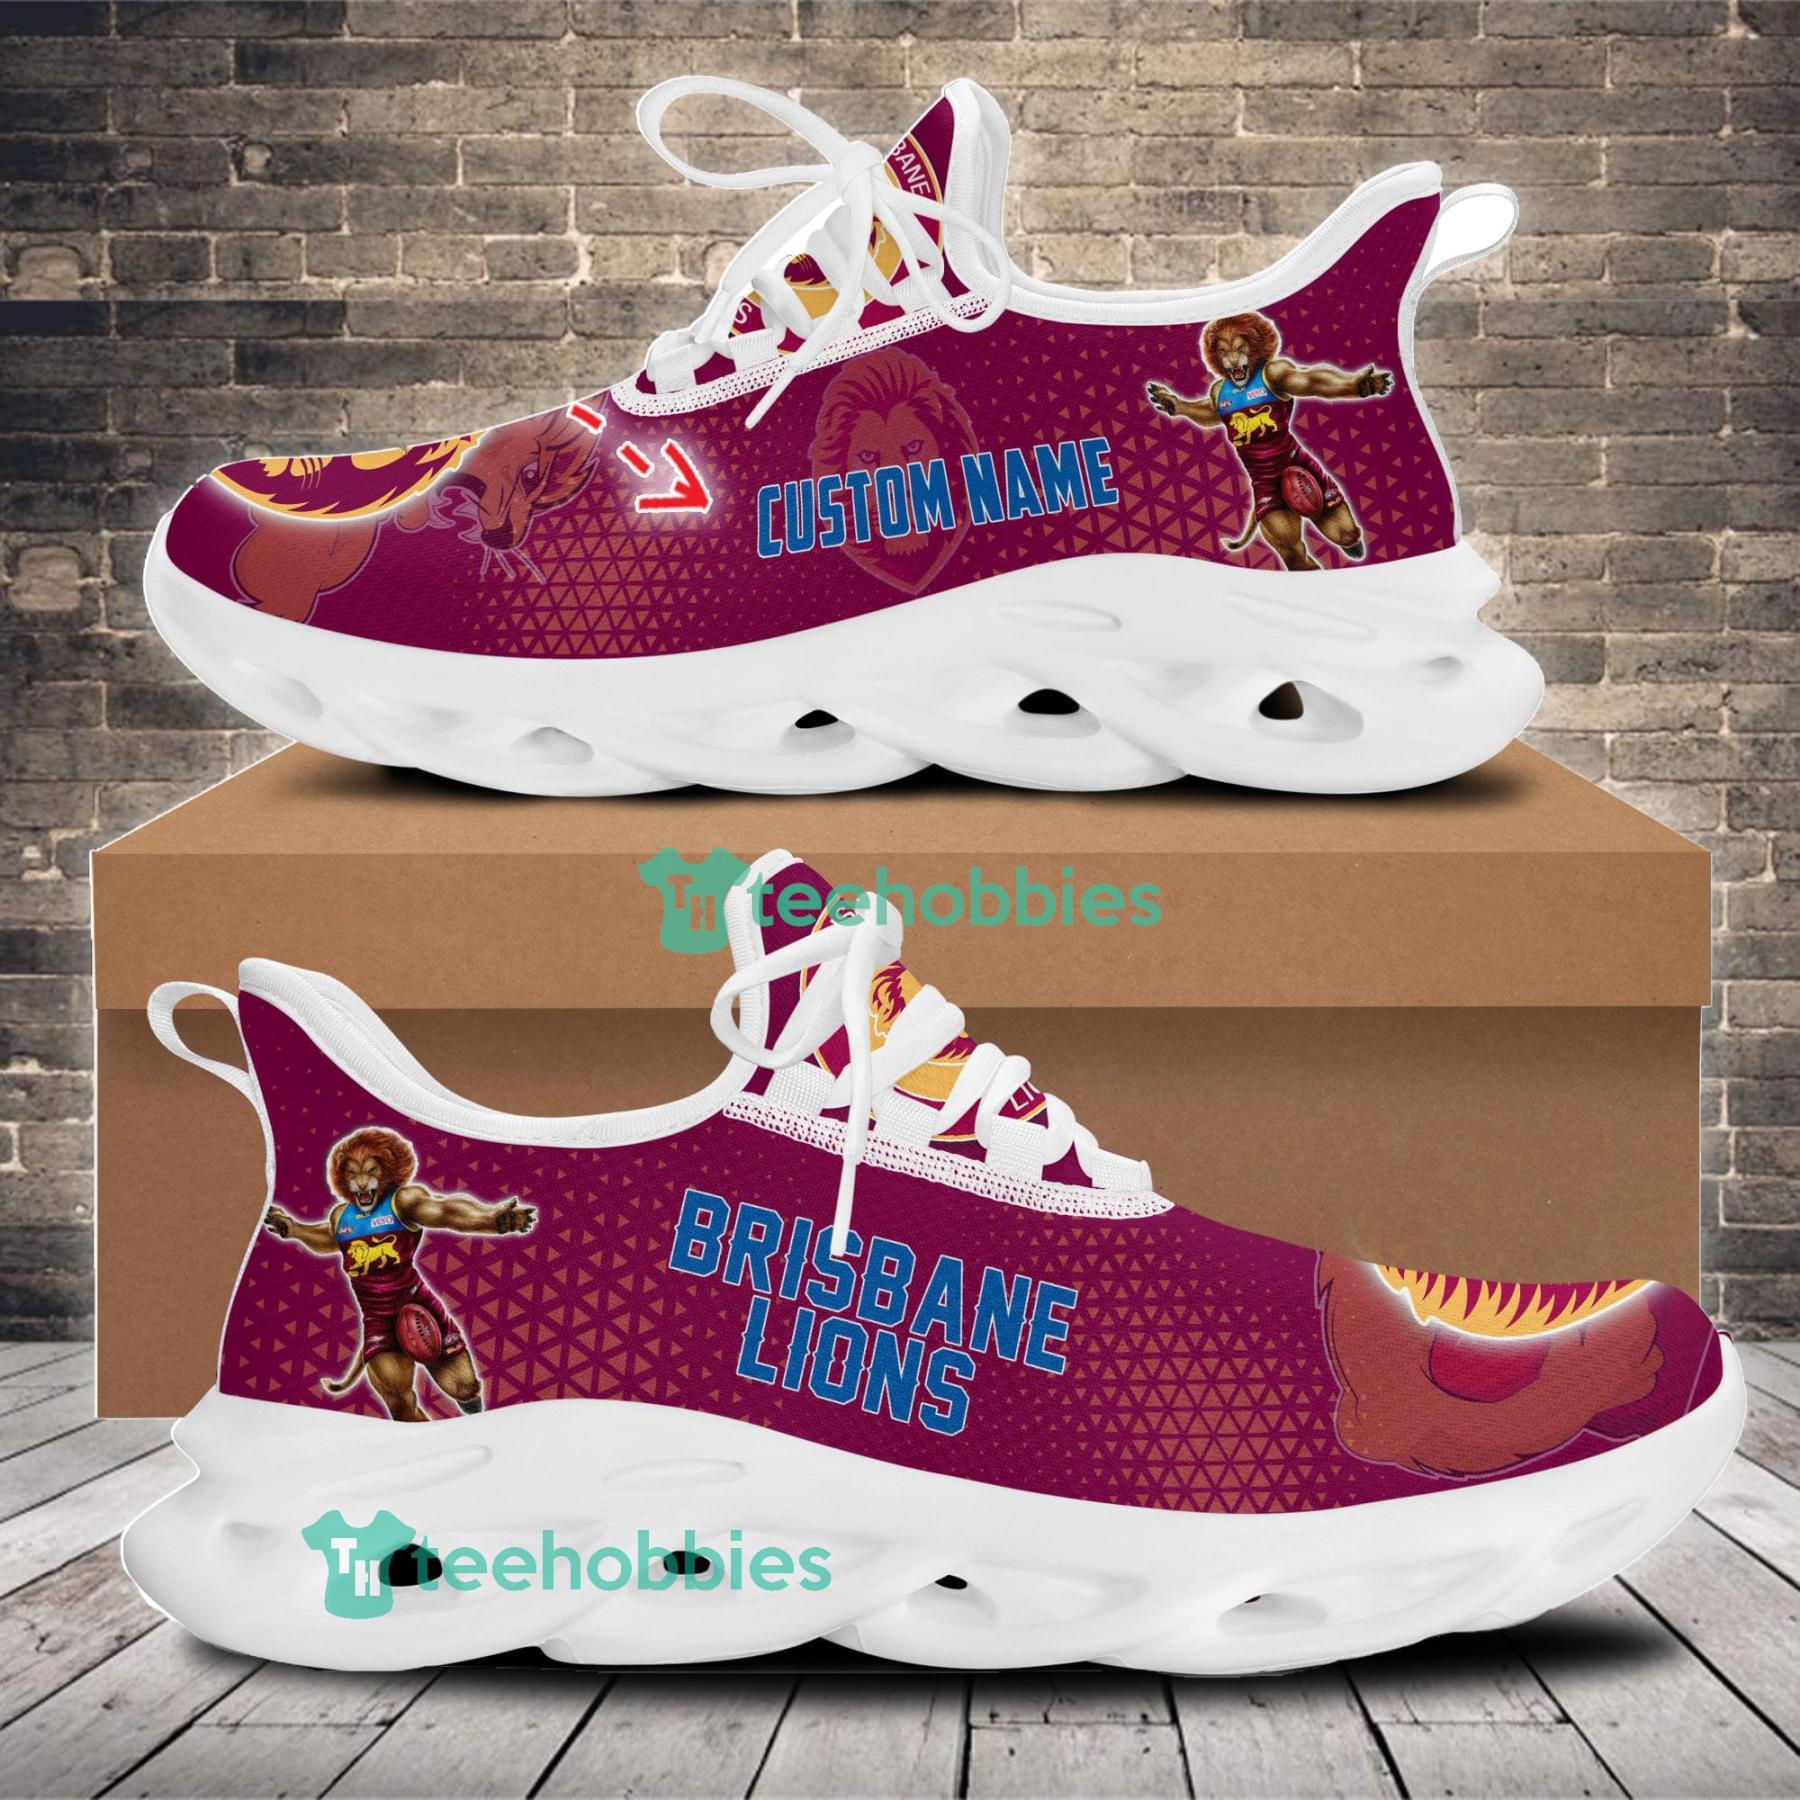 Brisbane Lions Mascot Custom Name Sneakers Max Soul Shoes For Men And Women Afl Sneakers Product Photo 1